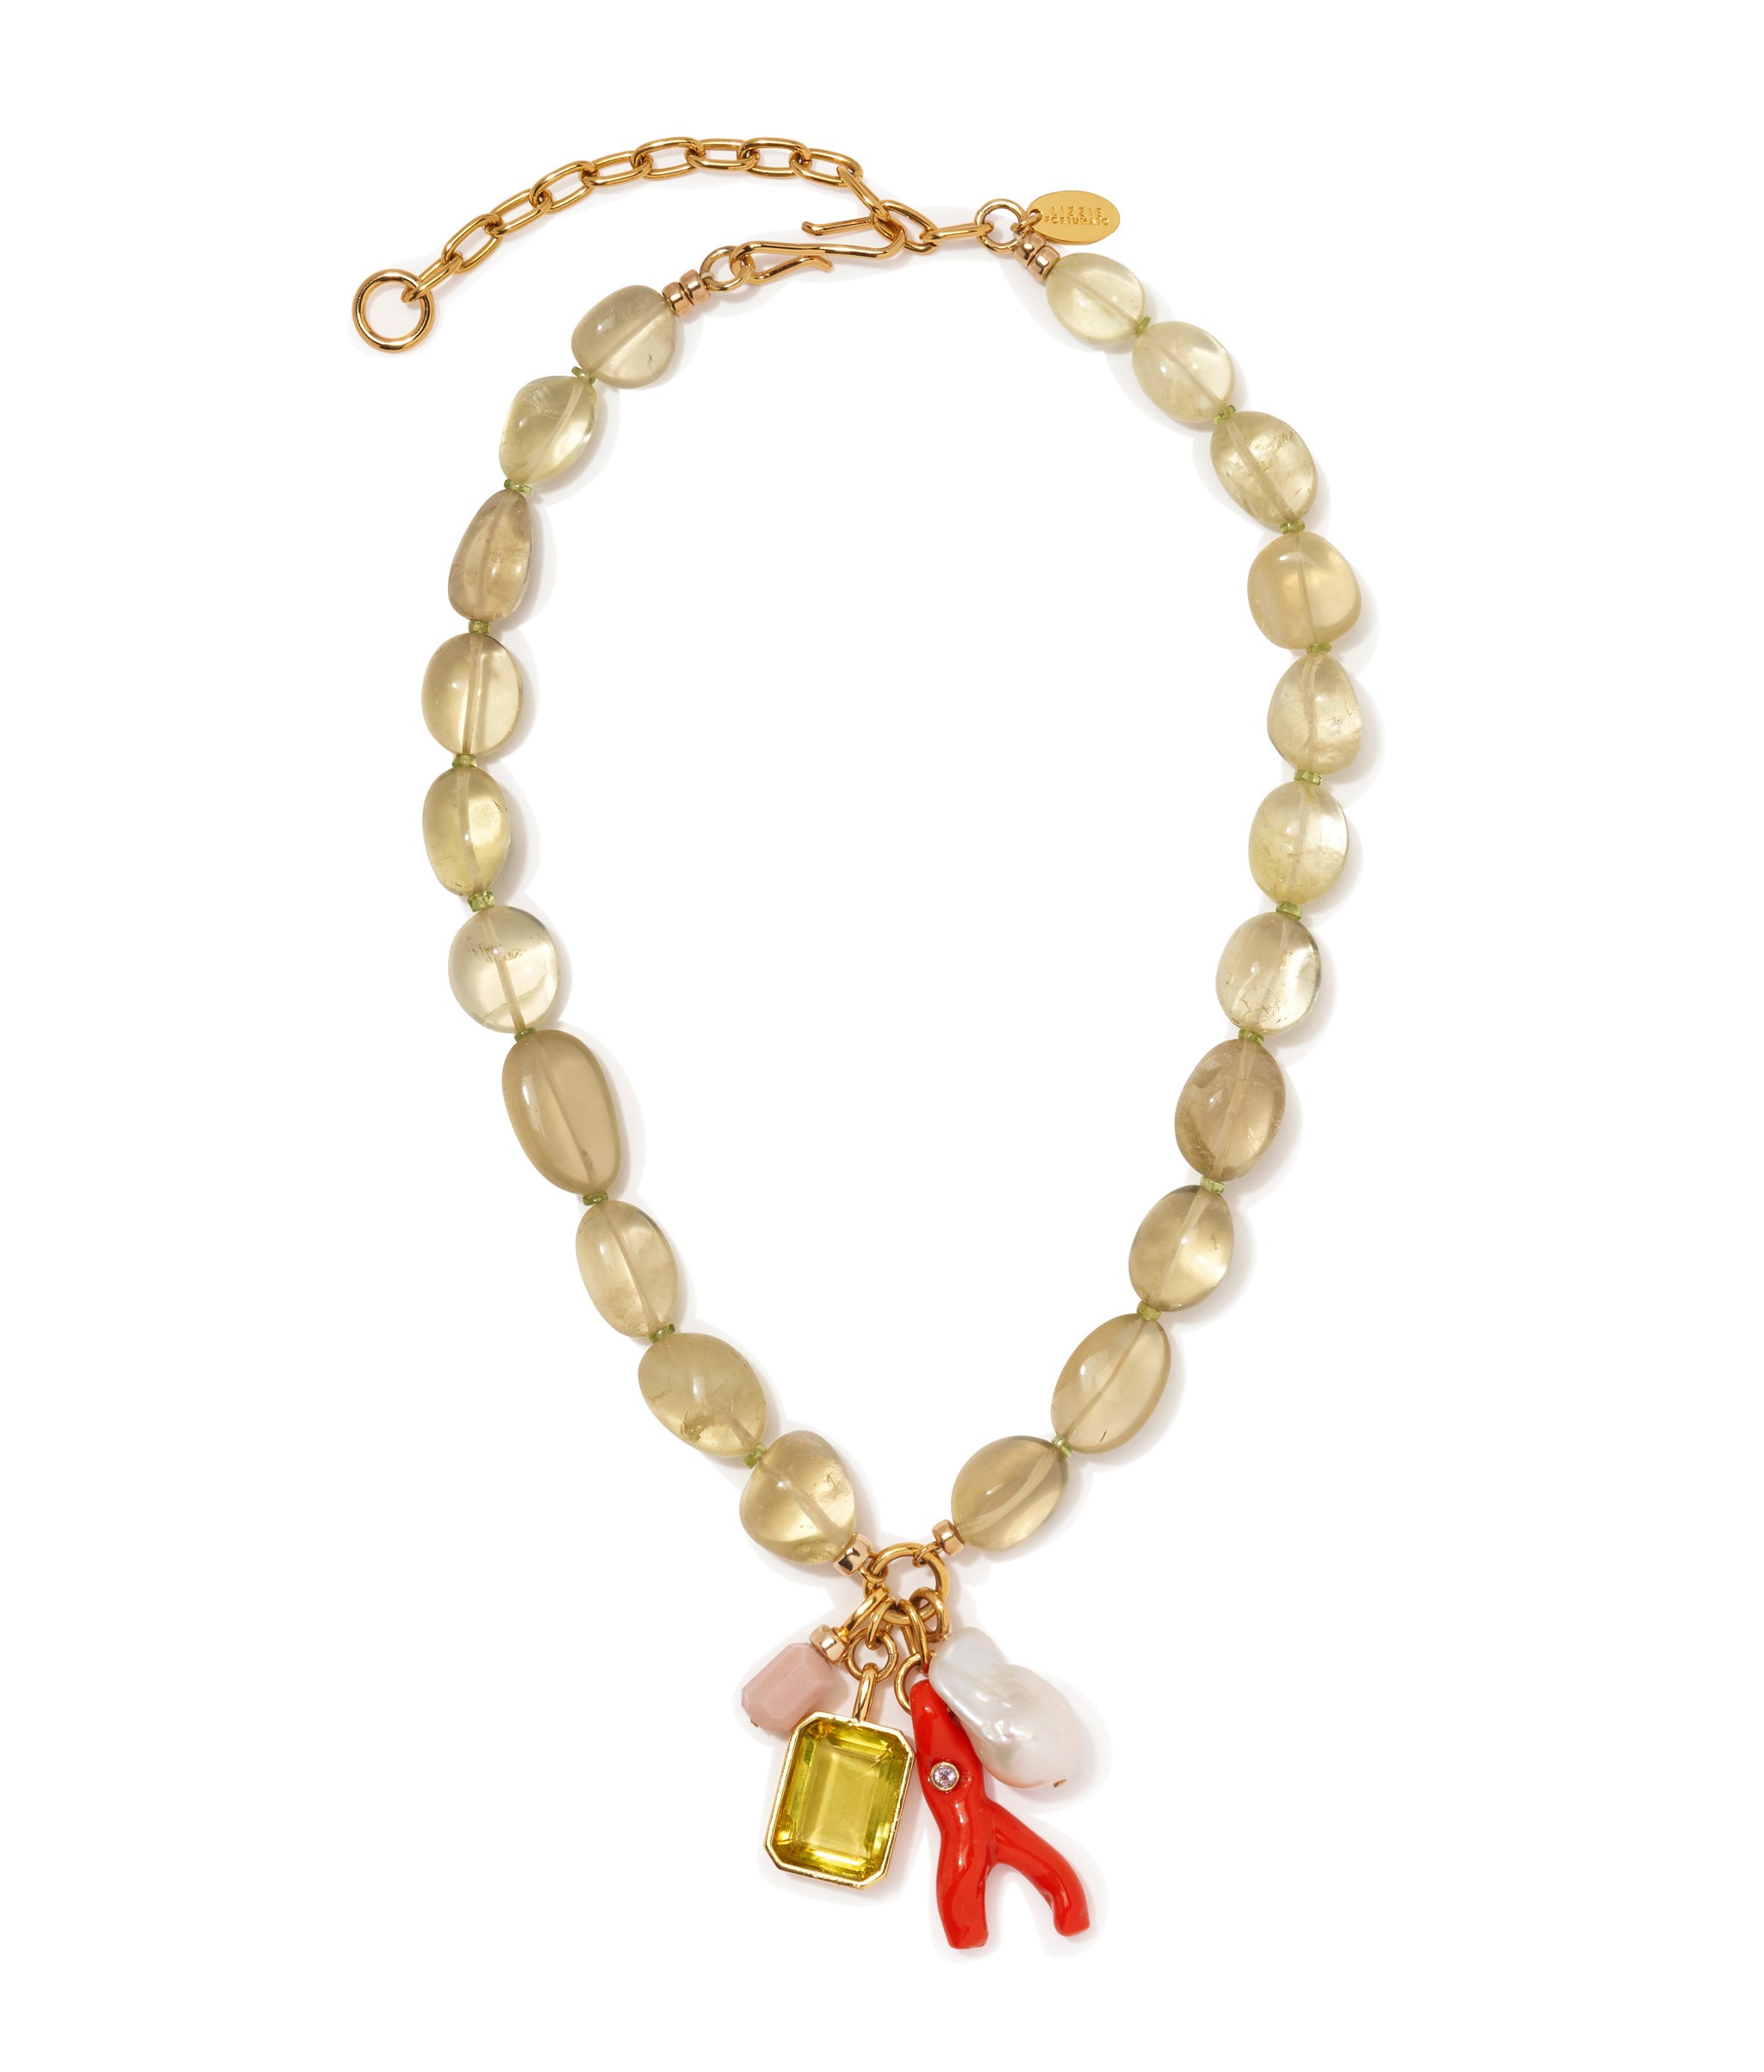 Beaded Reef Necklace. Lemon quartz, dotted peridot, pink opal, green glass, red coral, pearl, and gold-plated brass.